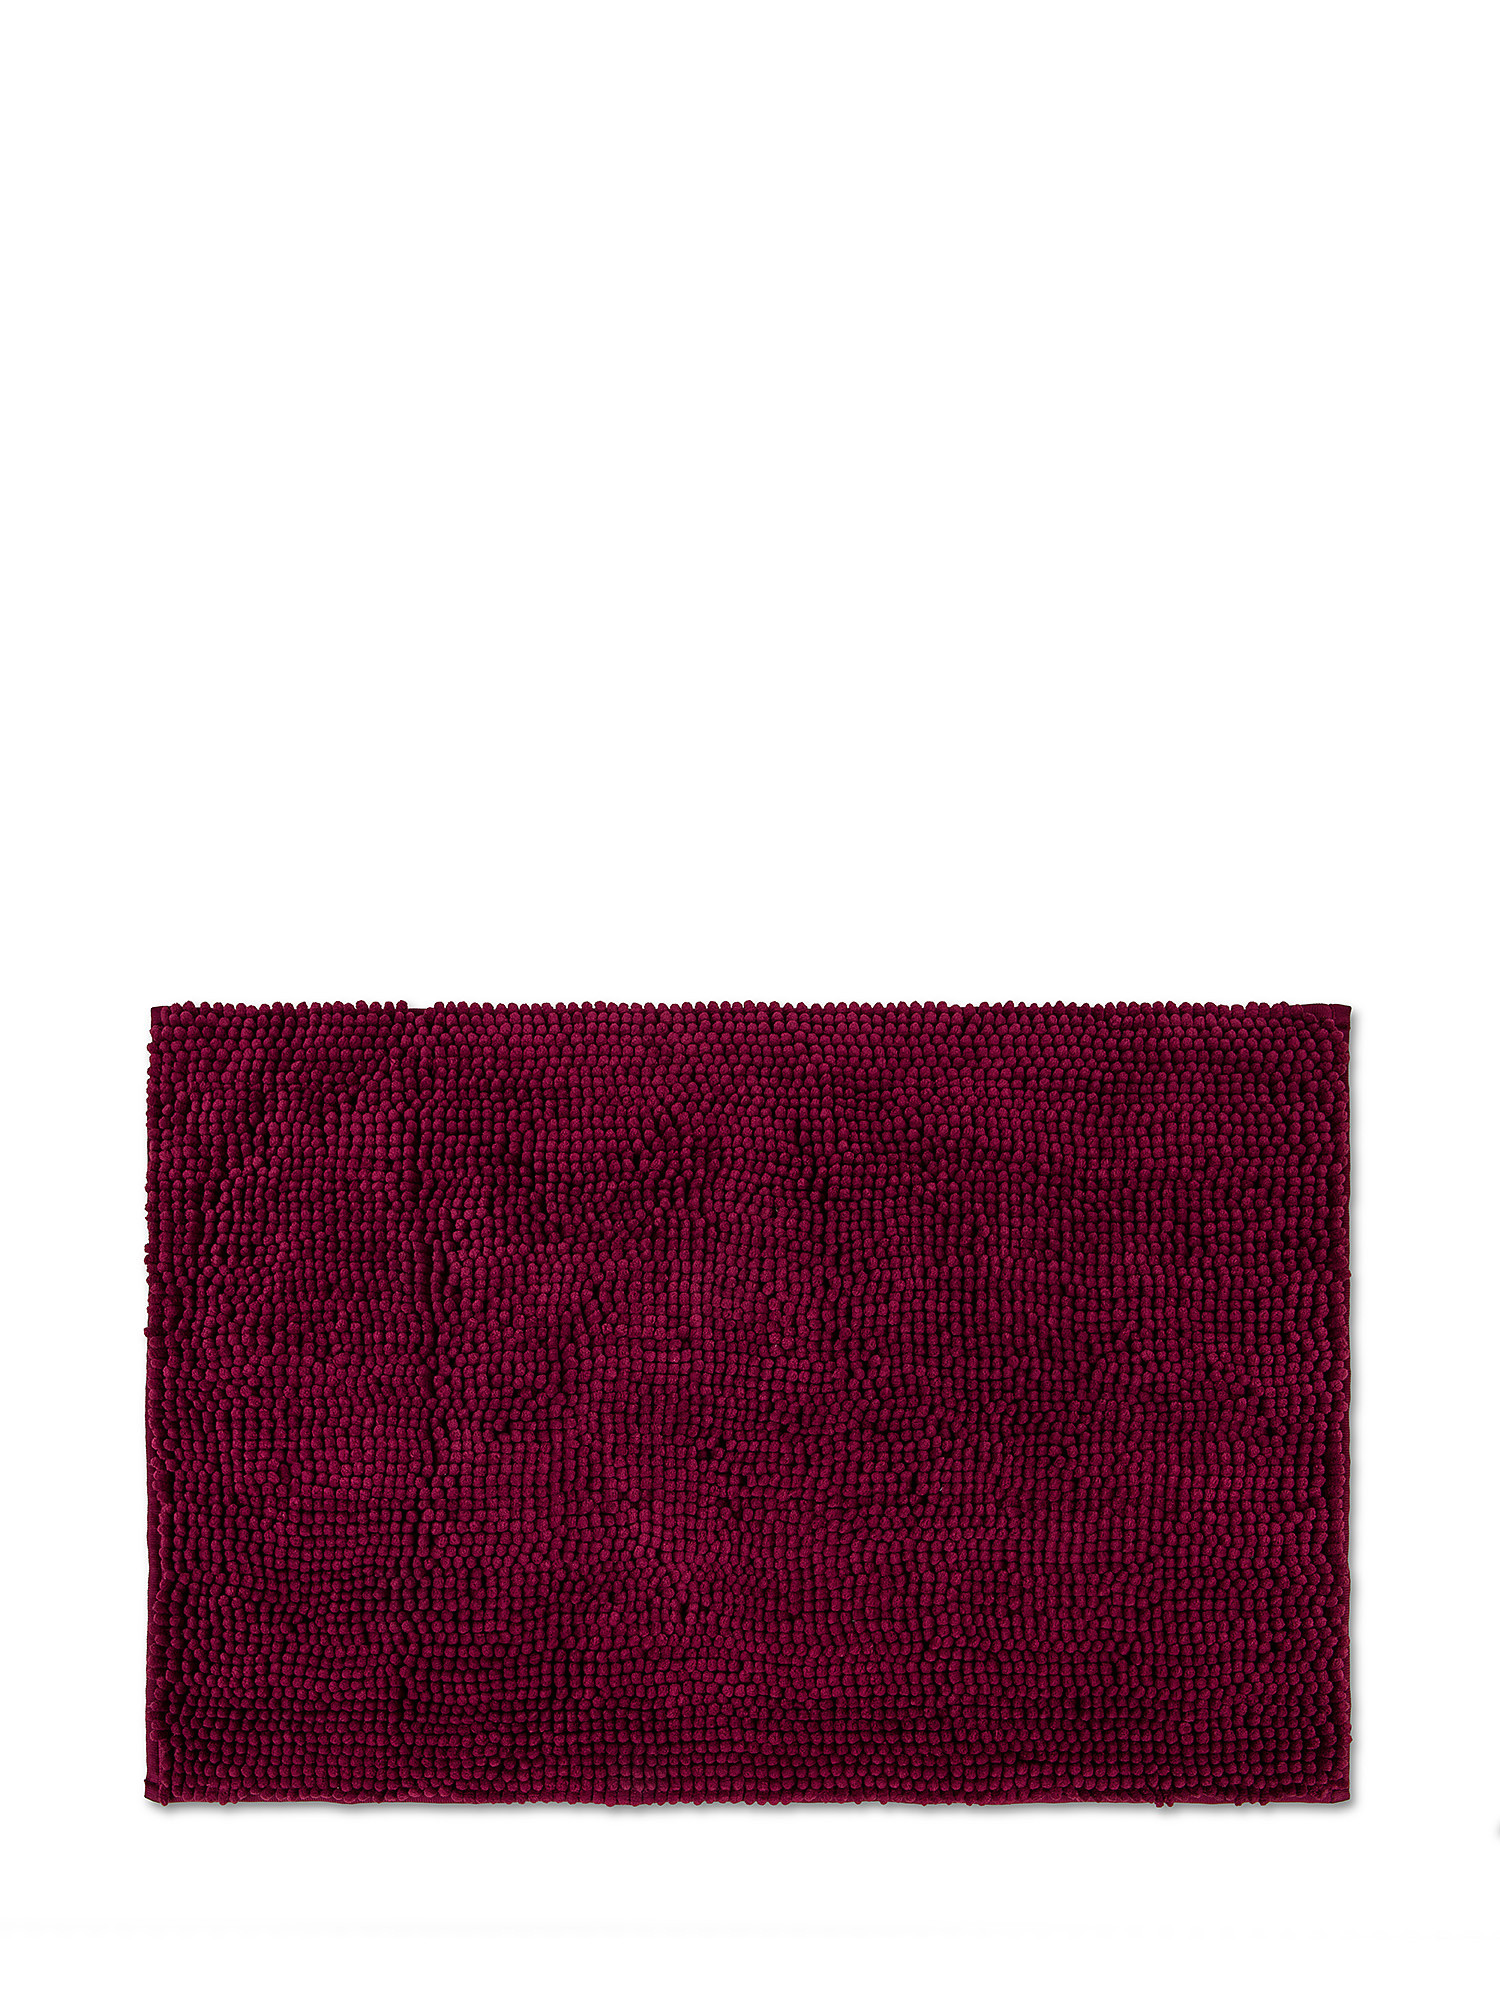 Zefiro solid color cotton bath rug, Cherry Red, large image number 0